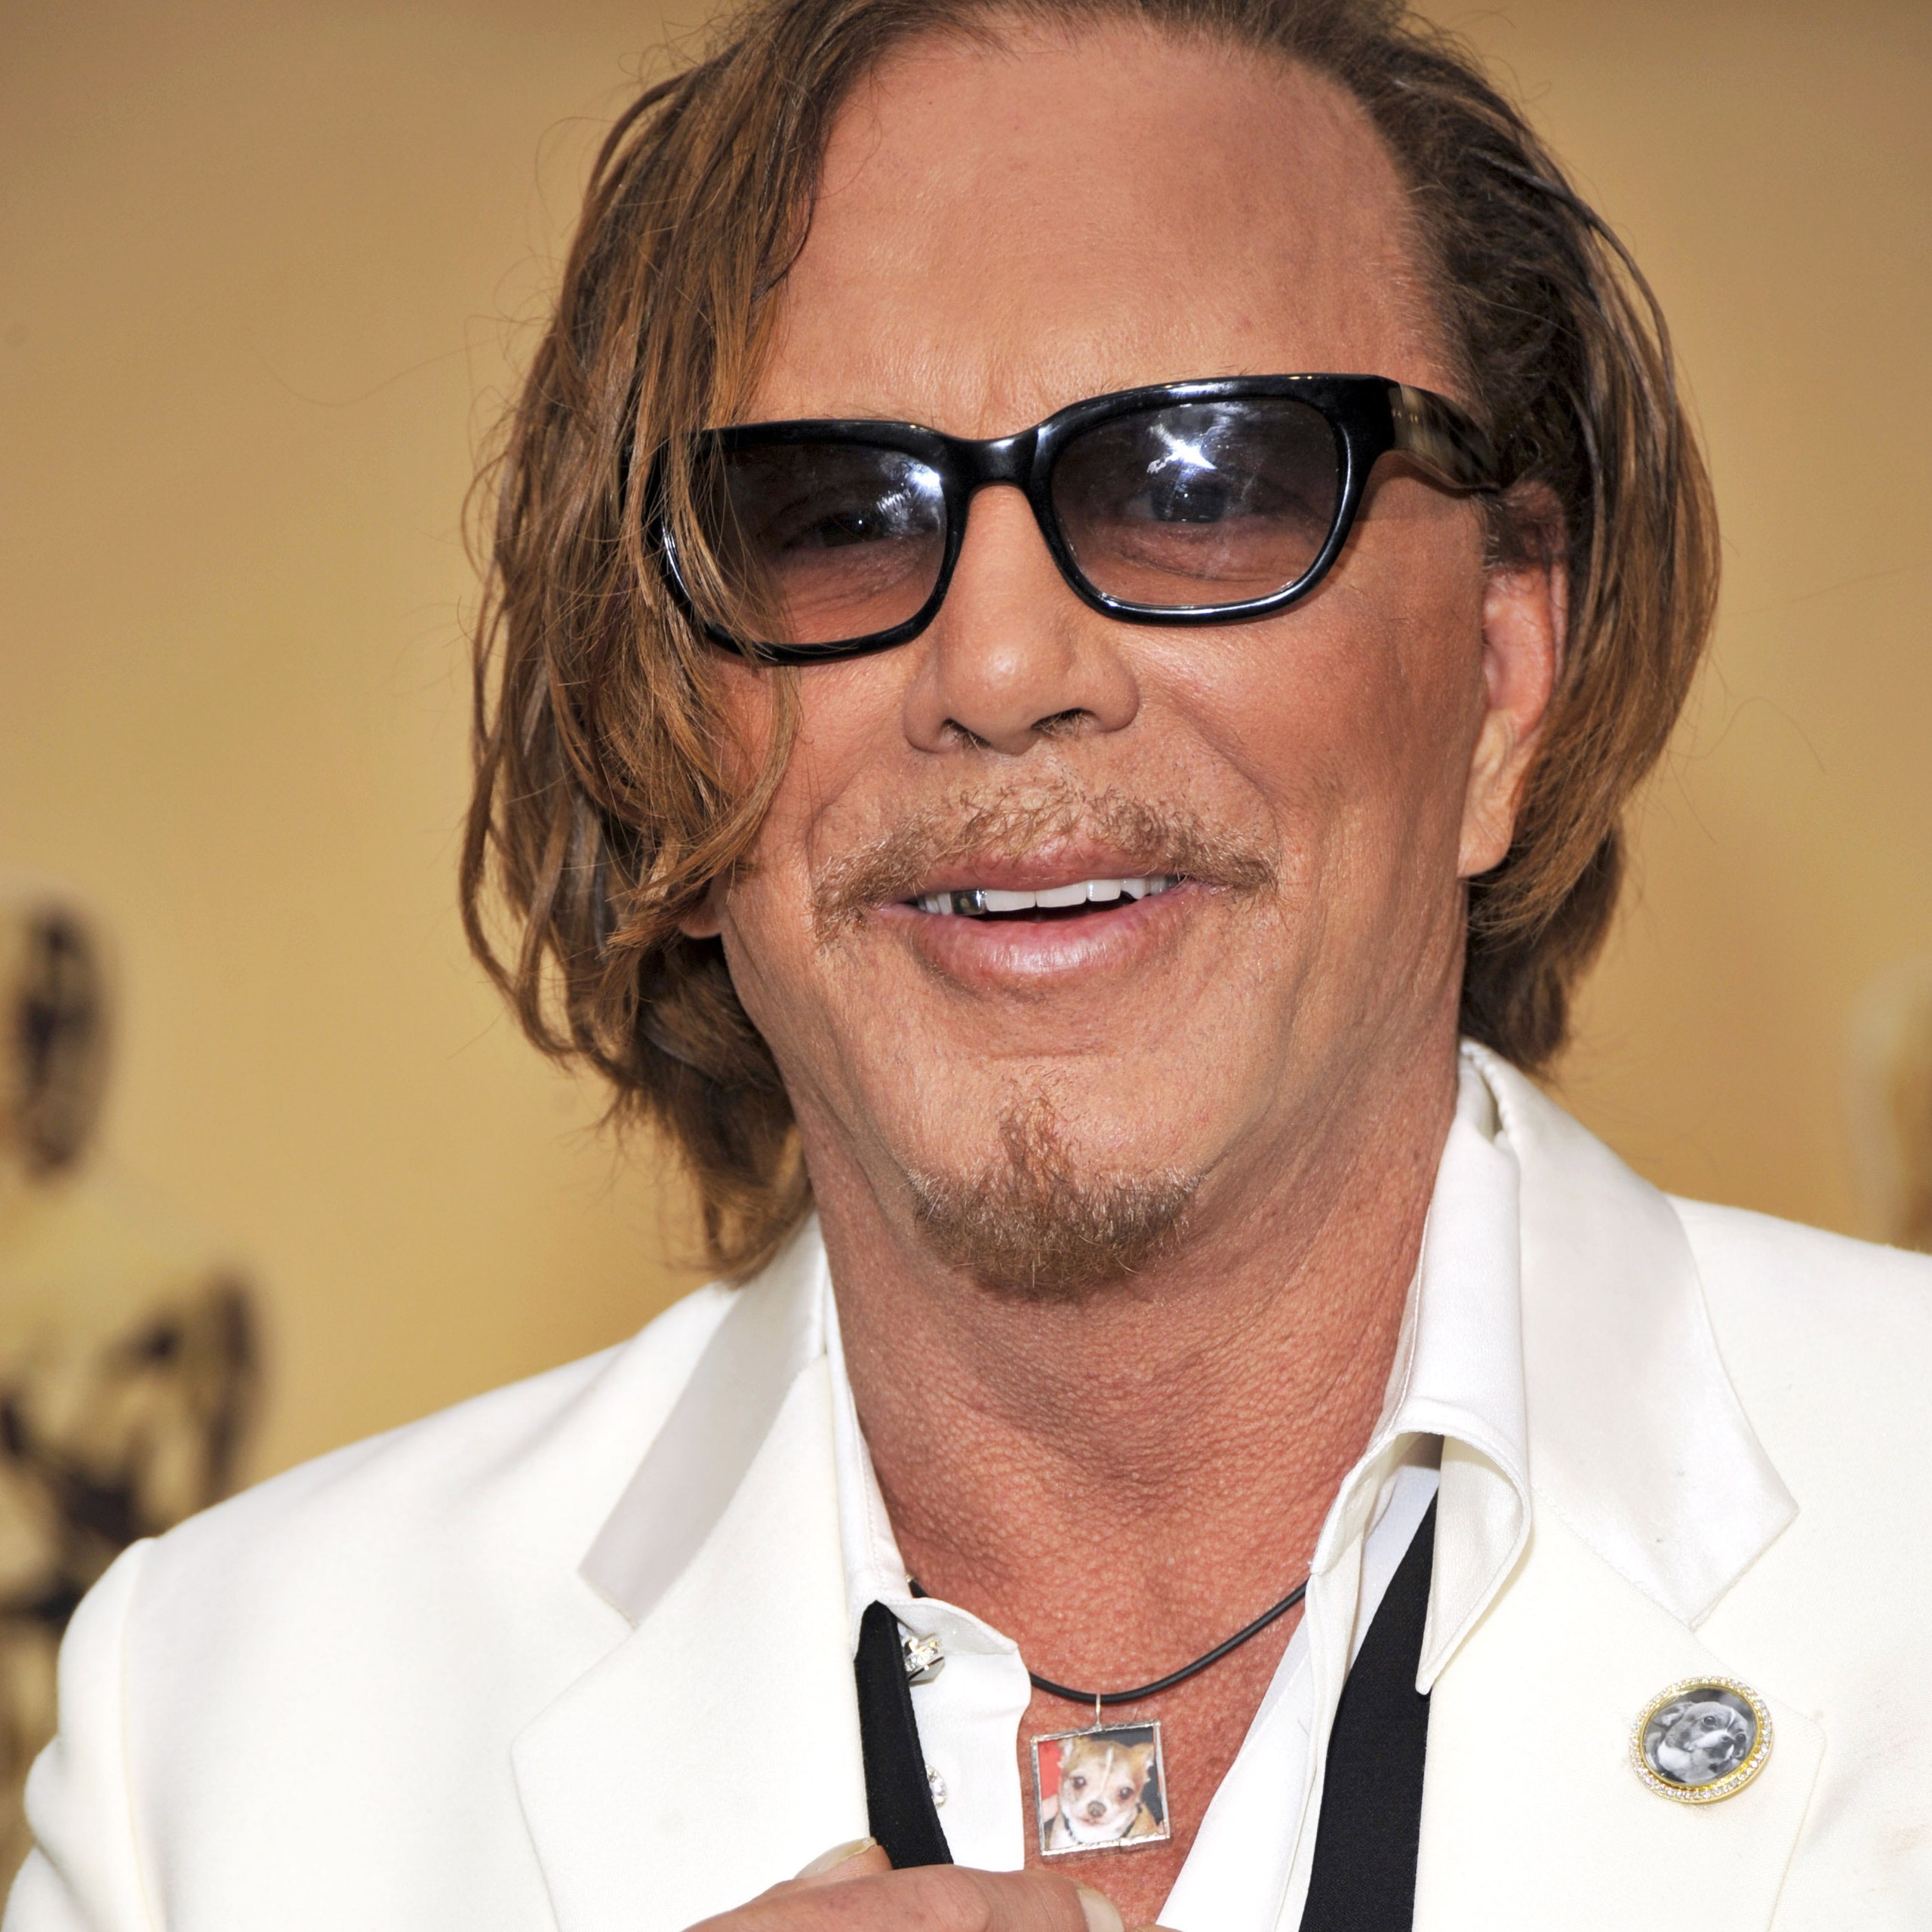 Image may contain Human Person Clothing Apparel Sunglasses Accessories Accessory Mickey Rourke Coat and Shirt